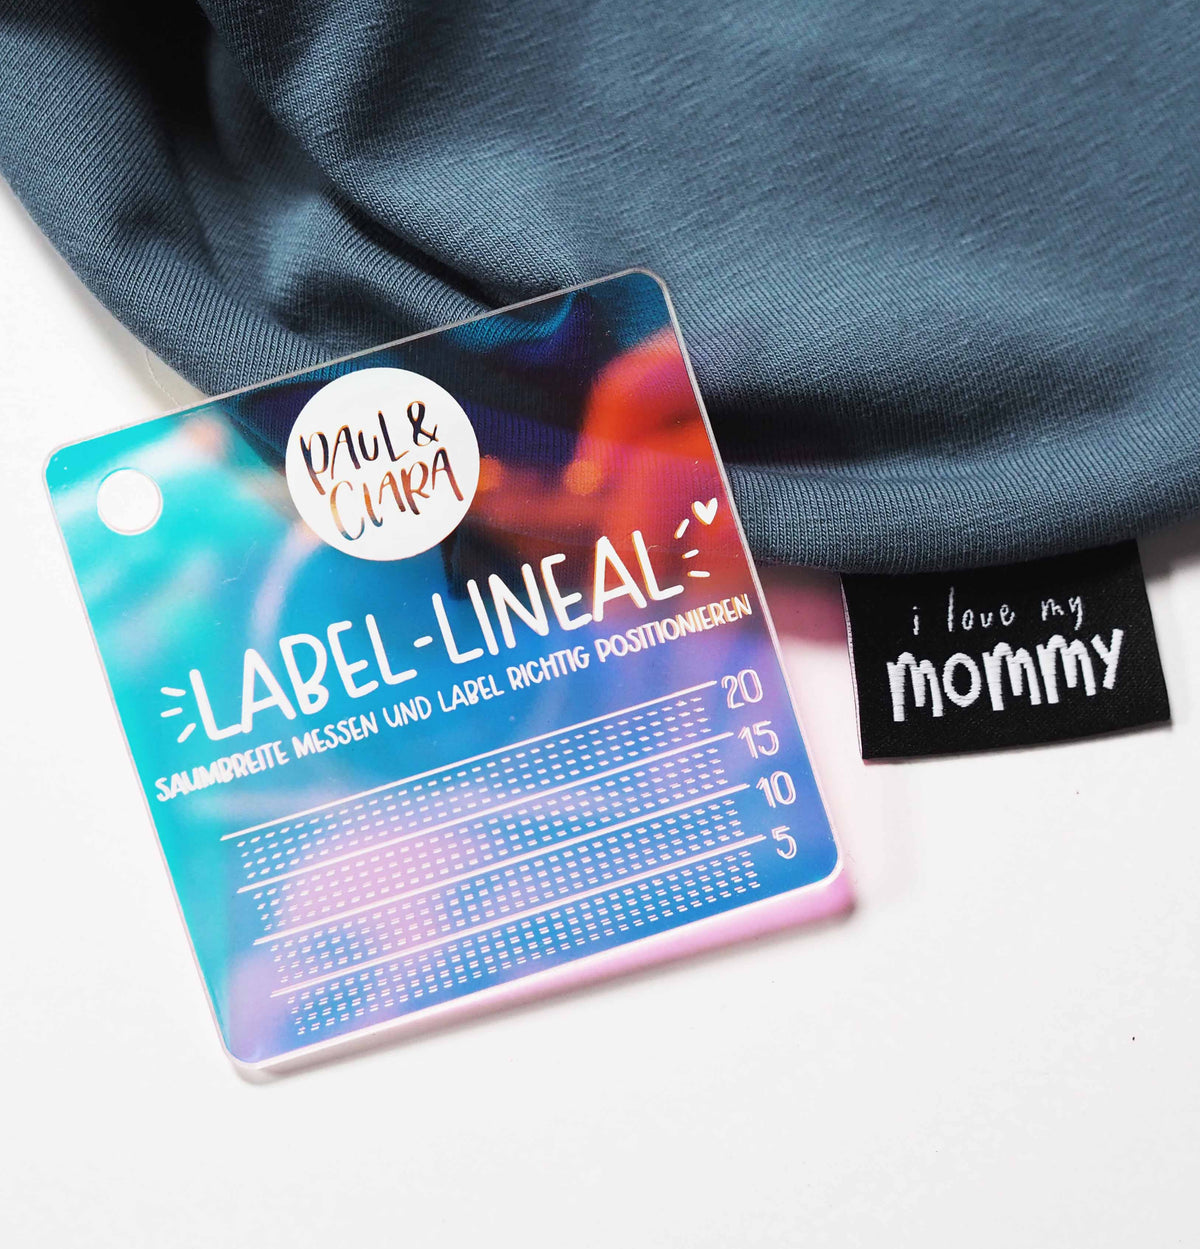 Label-Lineal